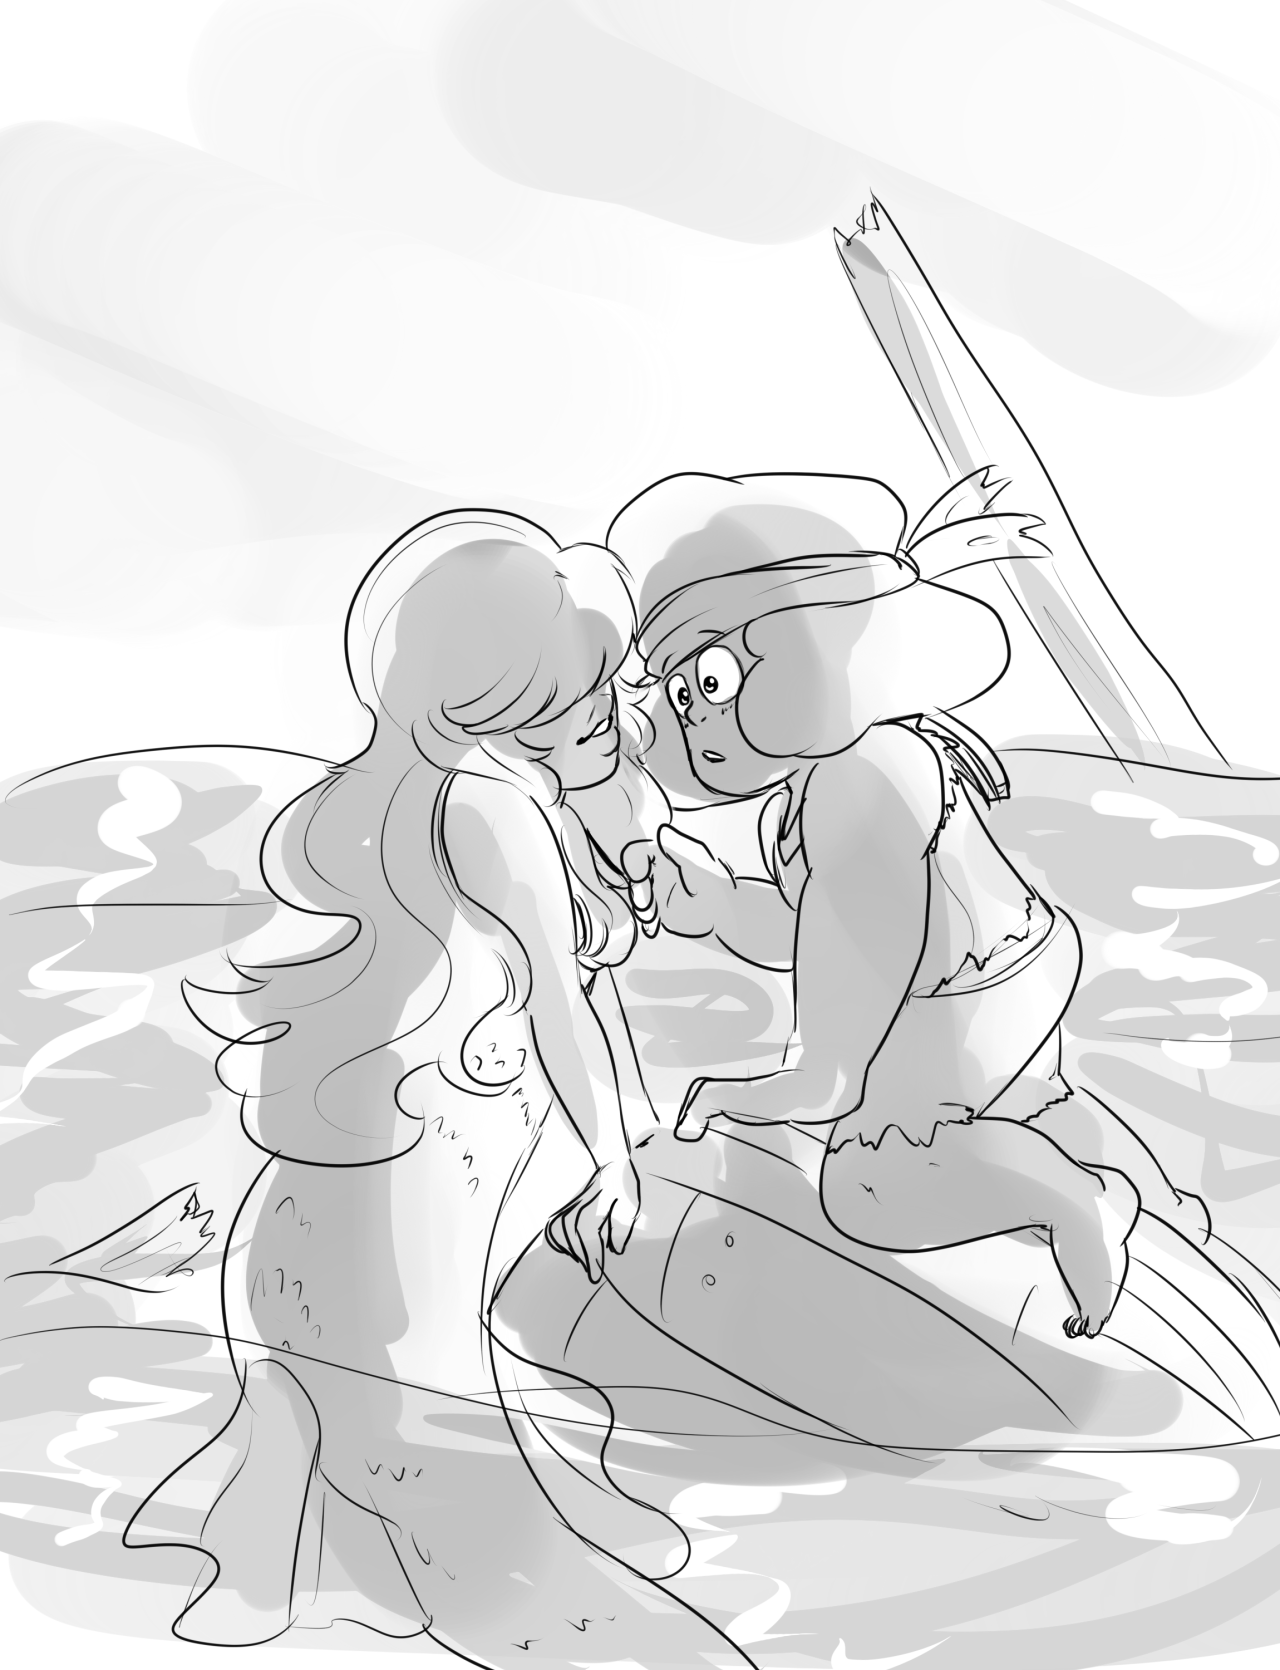 AU in which Sapphire is a Siren and caused Sailor Ruby’s ship to go down but Sapphire